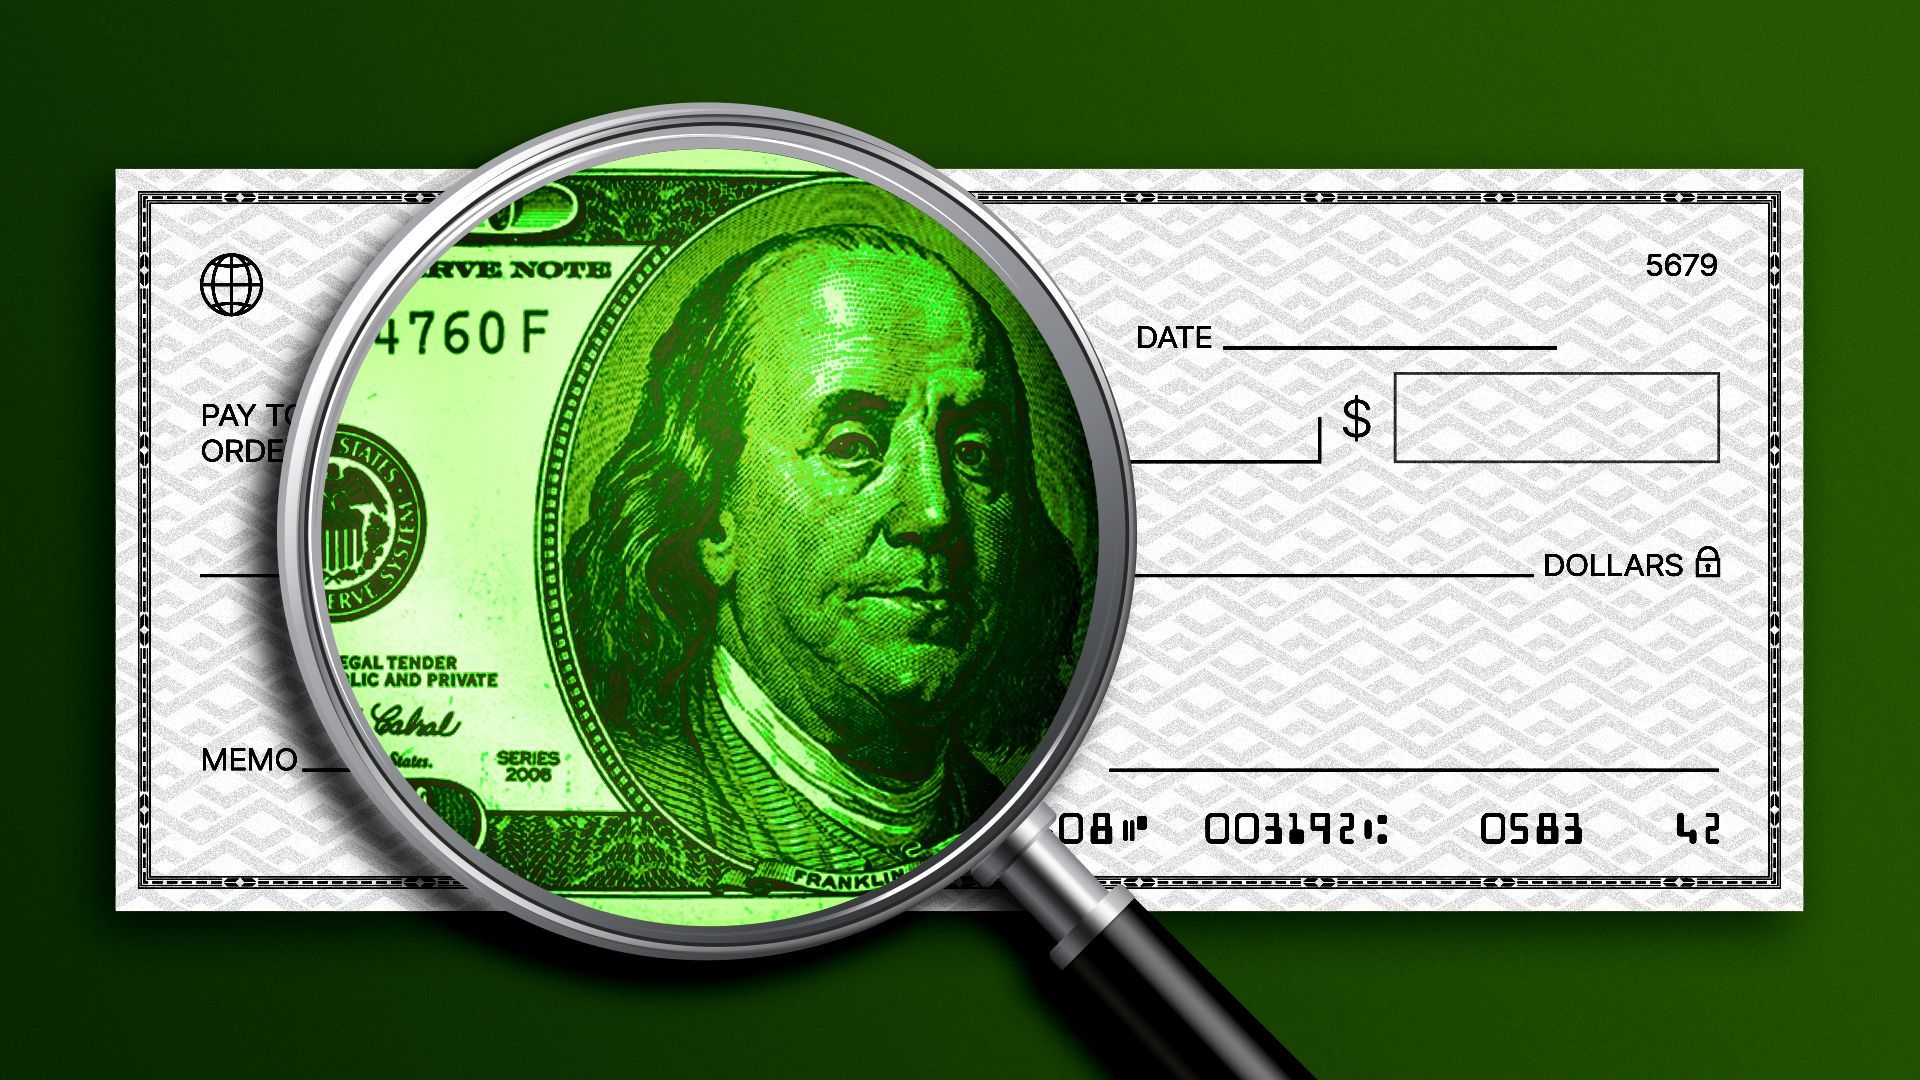 Illustration of a blank check with a magnifying glass hovering over it, revealing a one hundred dollar bill within the glass